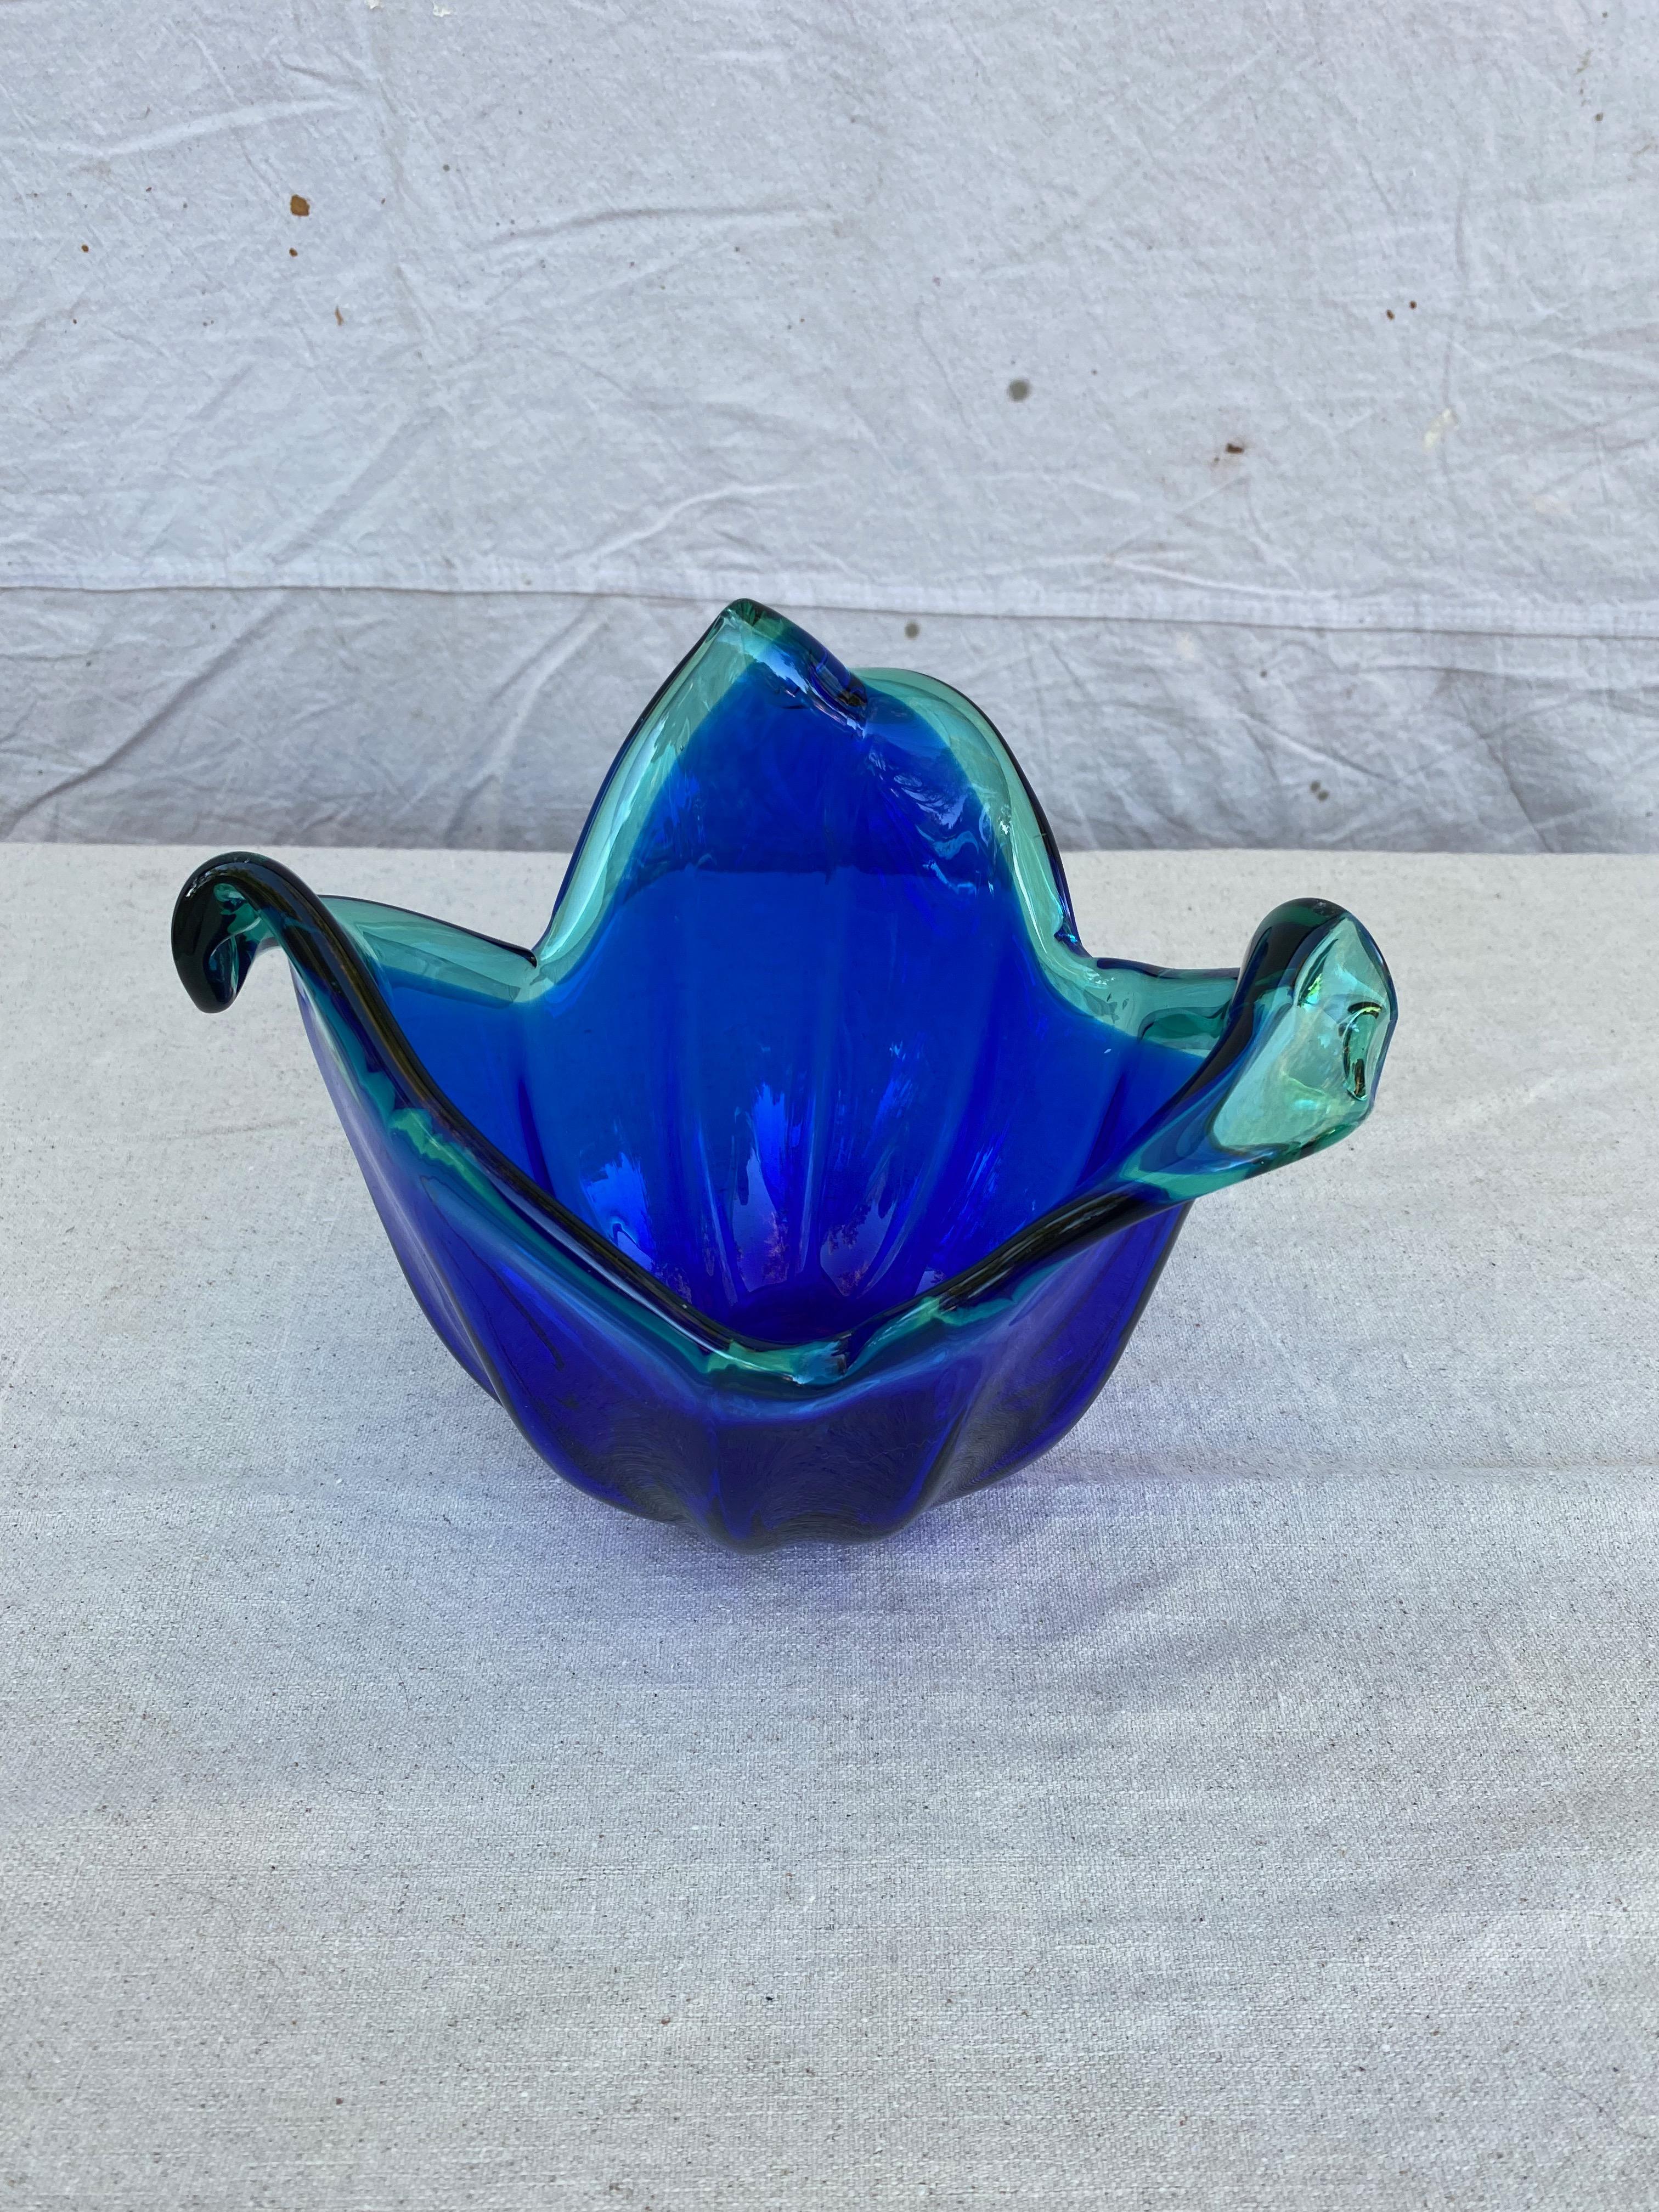 An interesting small Murano dish in a rich cobalt blue color having a lighter teal green variation at the top. The dish has stylized petal edges and has the original manufacturers label. 

Italian, 1960s.